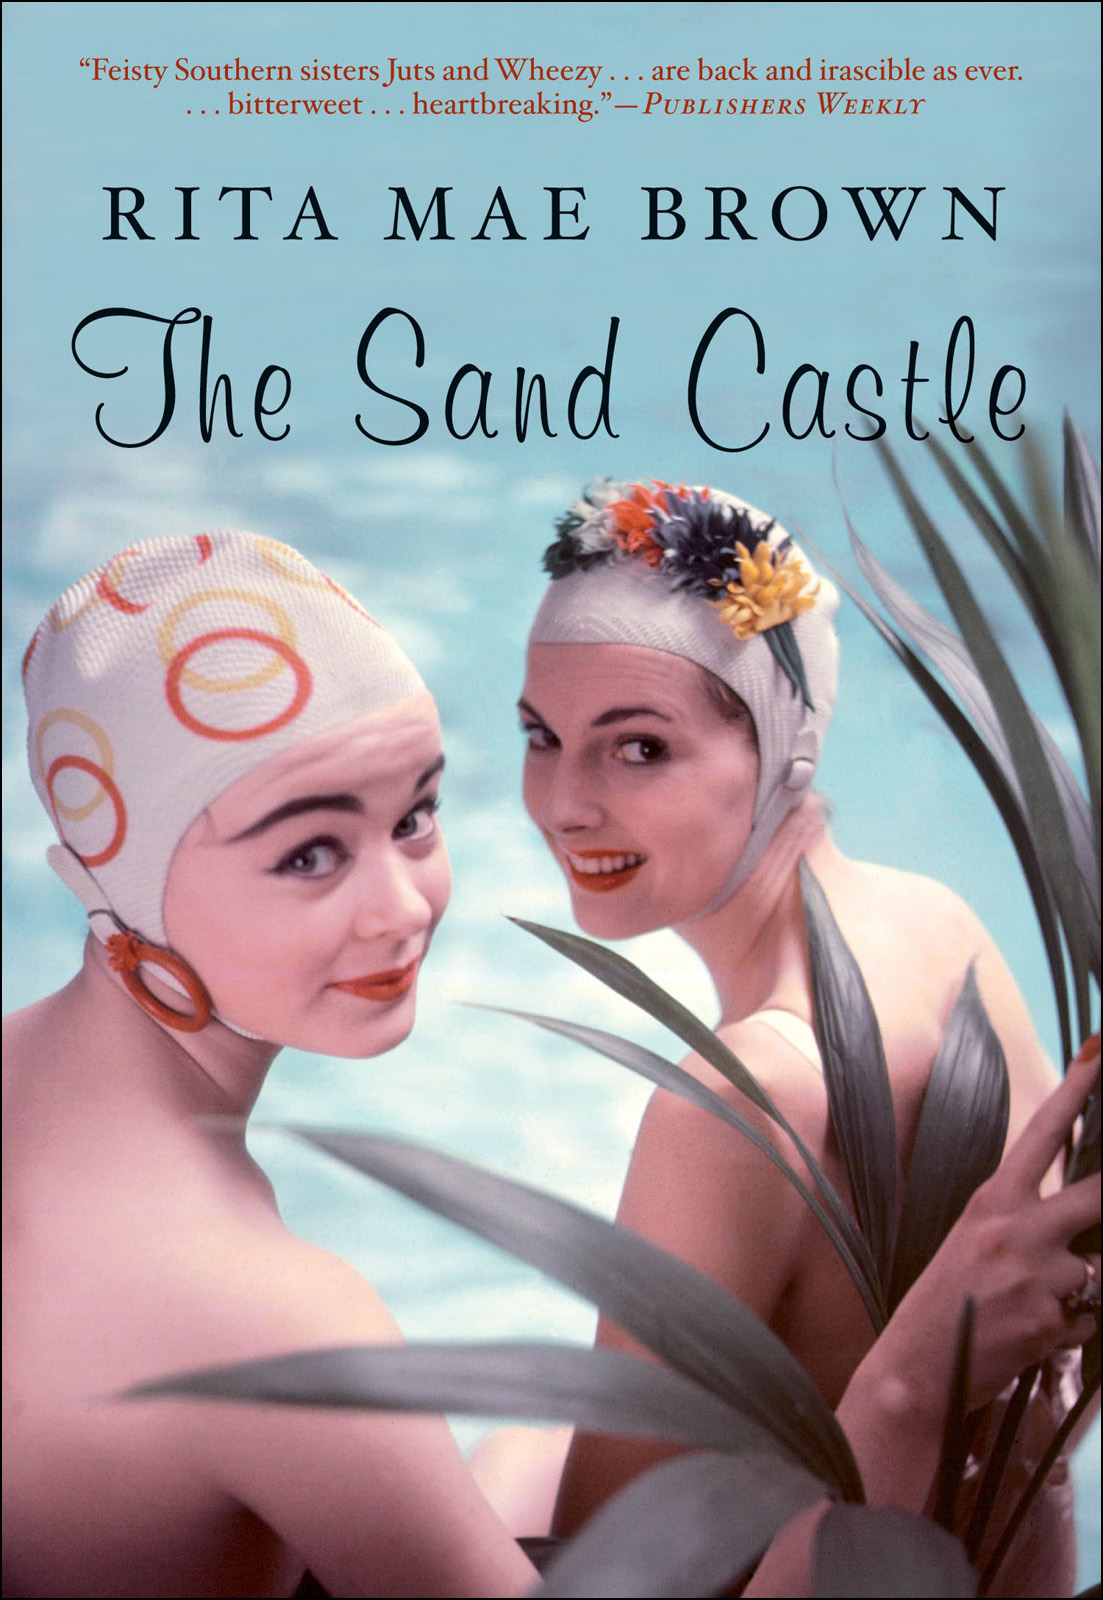 The Sand Castle (2008) by Rita Mae Brown